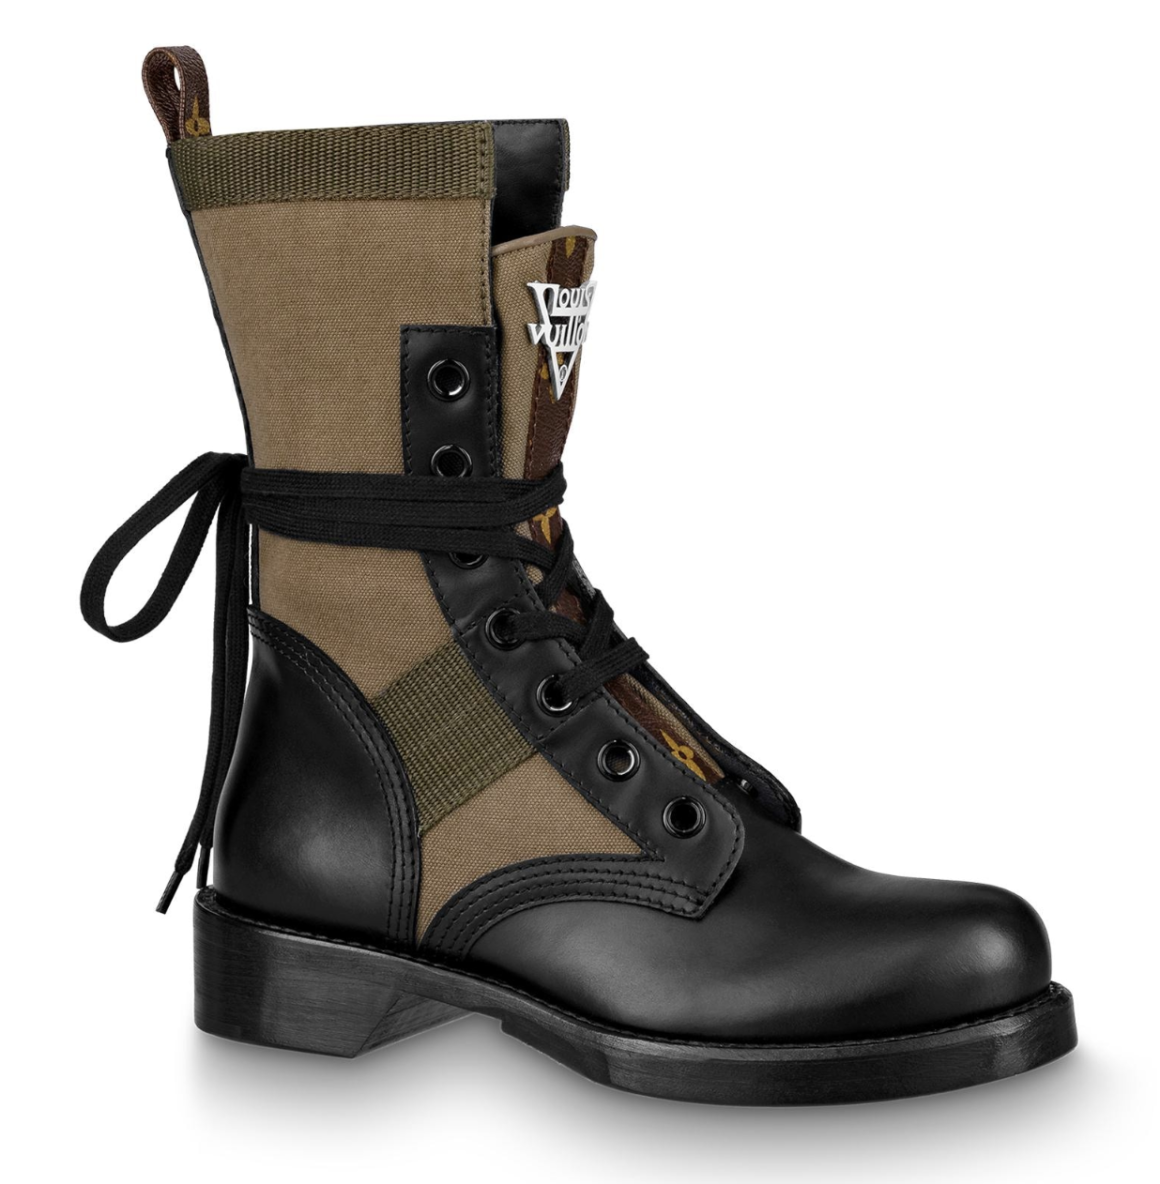 Bomb_Product_of_the_Day_Louis_Vuitton_Metropolis_Flat_Ranger_Boots_4